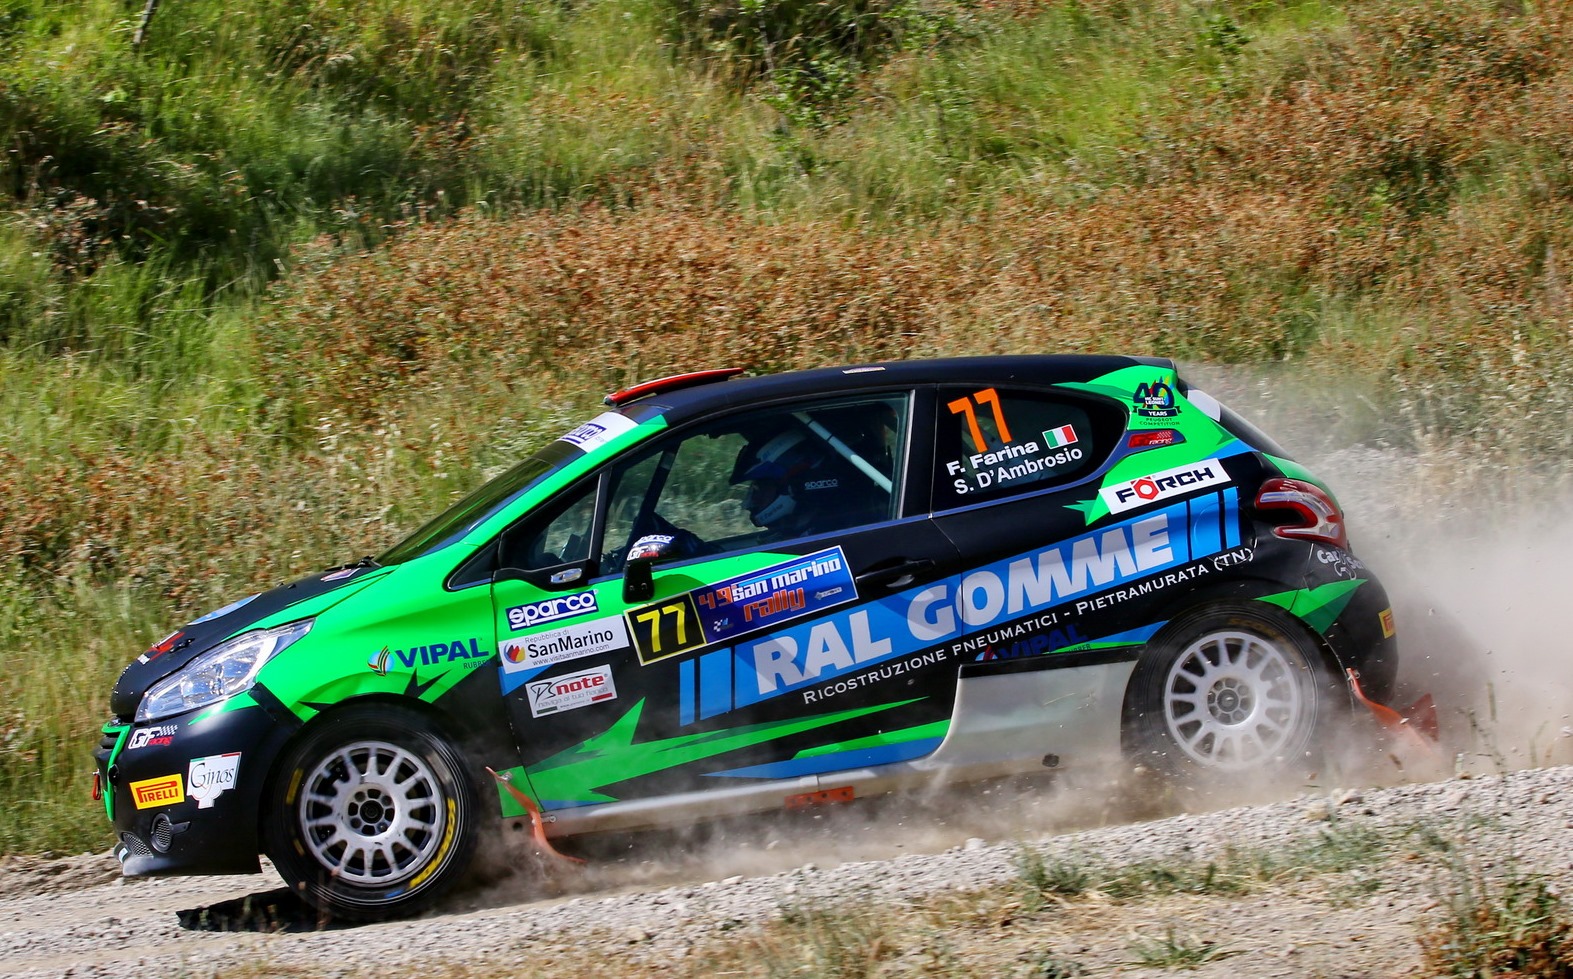 Vipal sponsors Italian rally driver, deepens Ral Gomme partnership